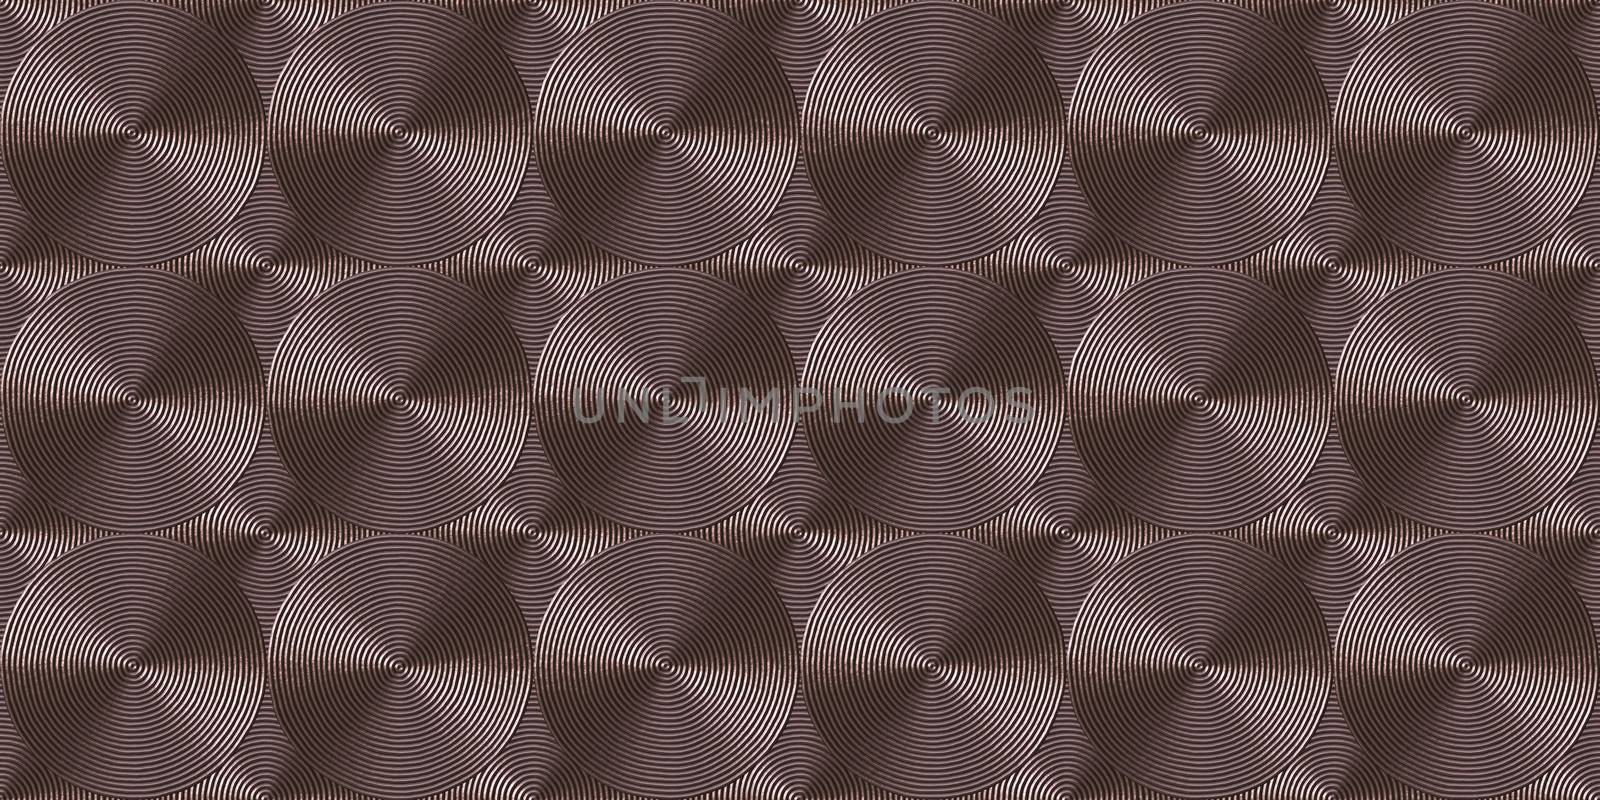 Copper art deco seamless texture. Vintage rings background. Metal circles pattern. by sanches812